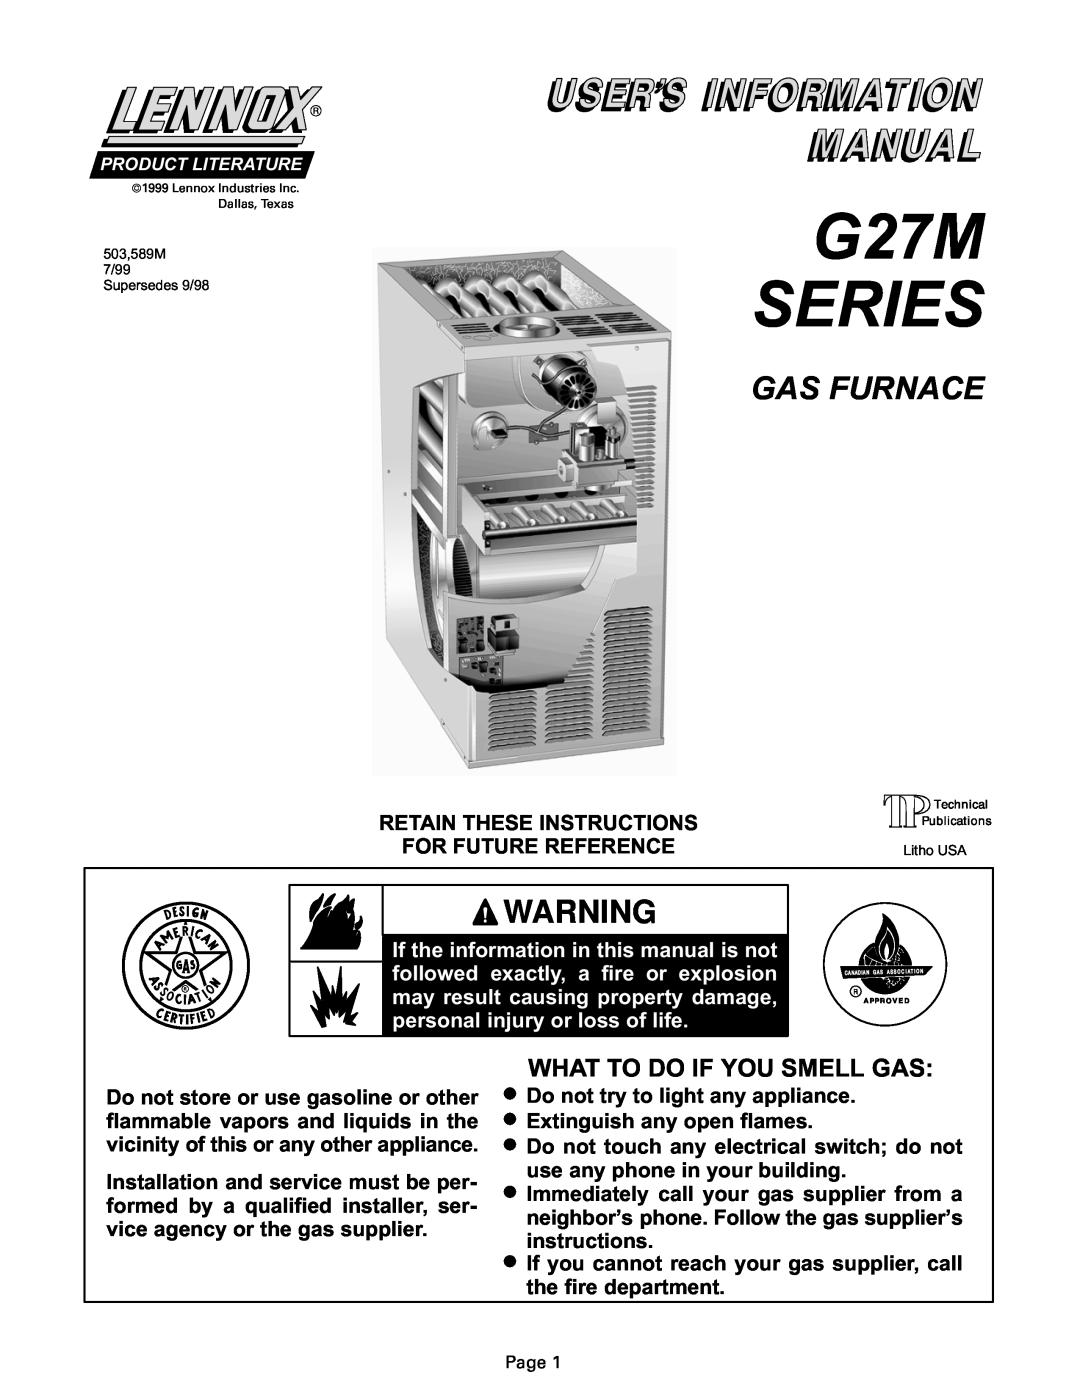 Lennox International Inc manual G27M SERIES, Gas Furnace, What To Do If You Smell Gas 